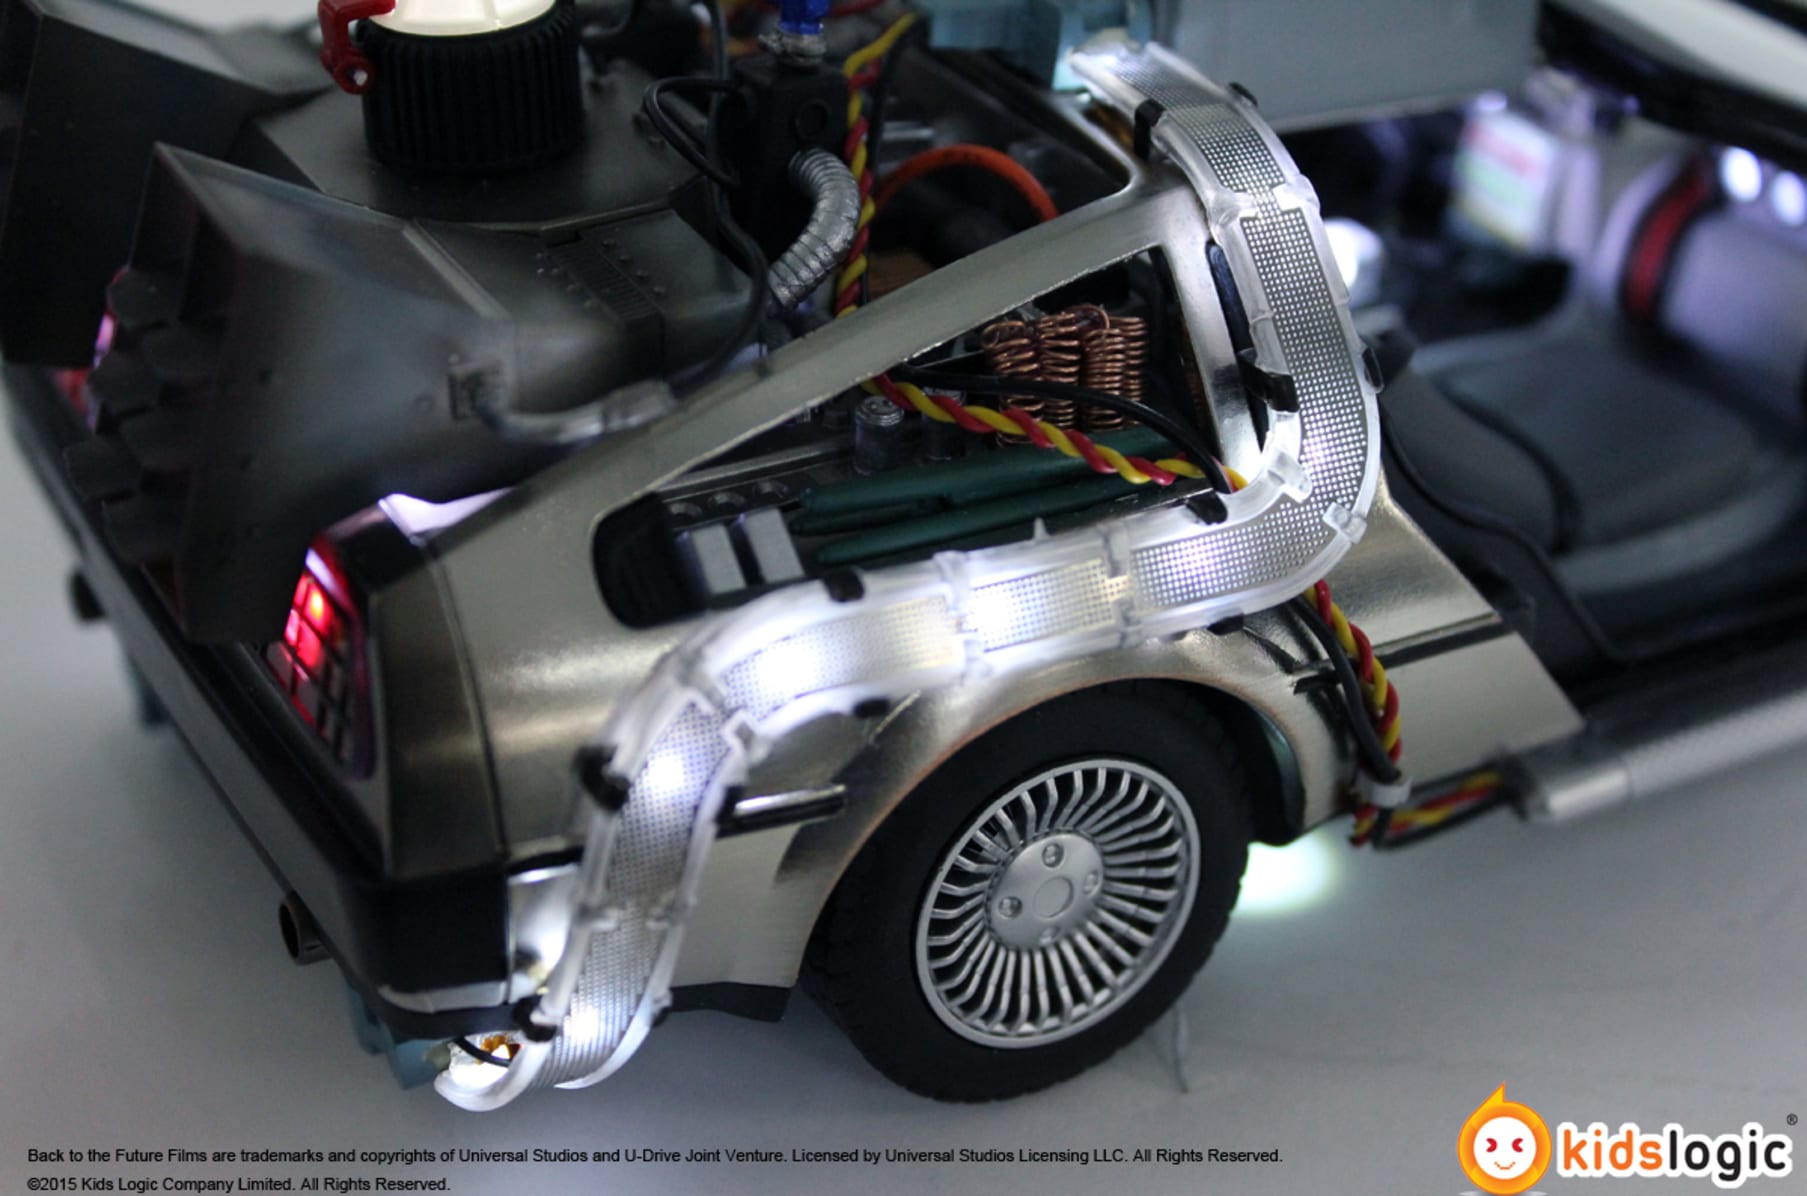 Trendy - DeLorean Time Machine Collectible Magnetic